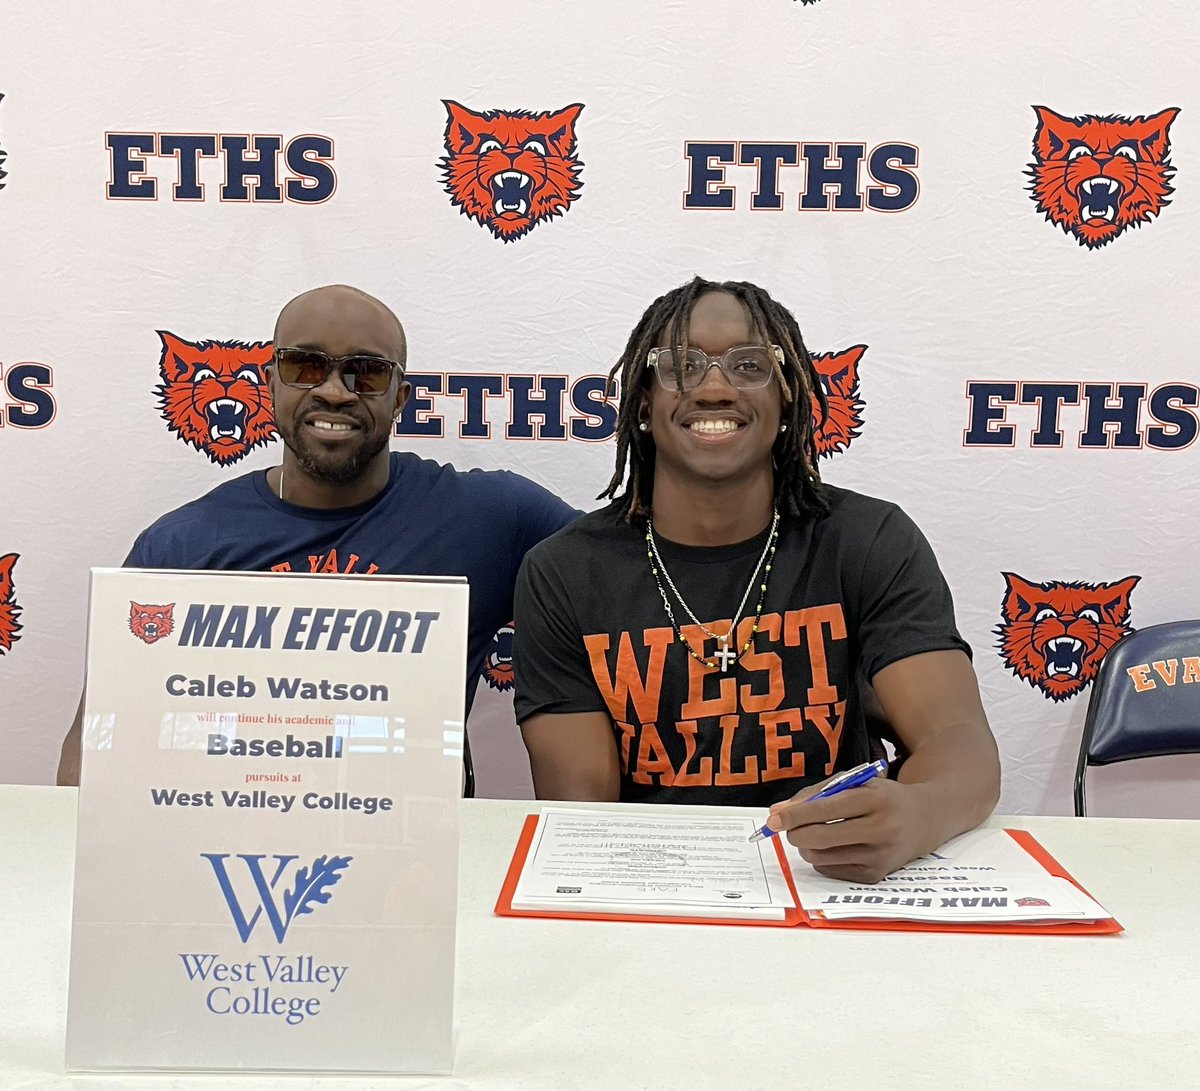 Congratulations & #MaxEffort to Caleb Watson on his commitment to attend school and continue playing Baseball at West Valley College!!! 
#Kits2College #SigningDay
@the_evanstonian @EvanstonPatch @CSL_Varsity @EvRoundTable @ETHSWildkits 
@WVCBaseball @WildkitBaseball